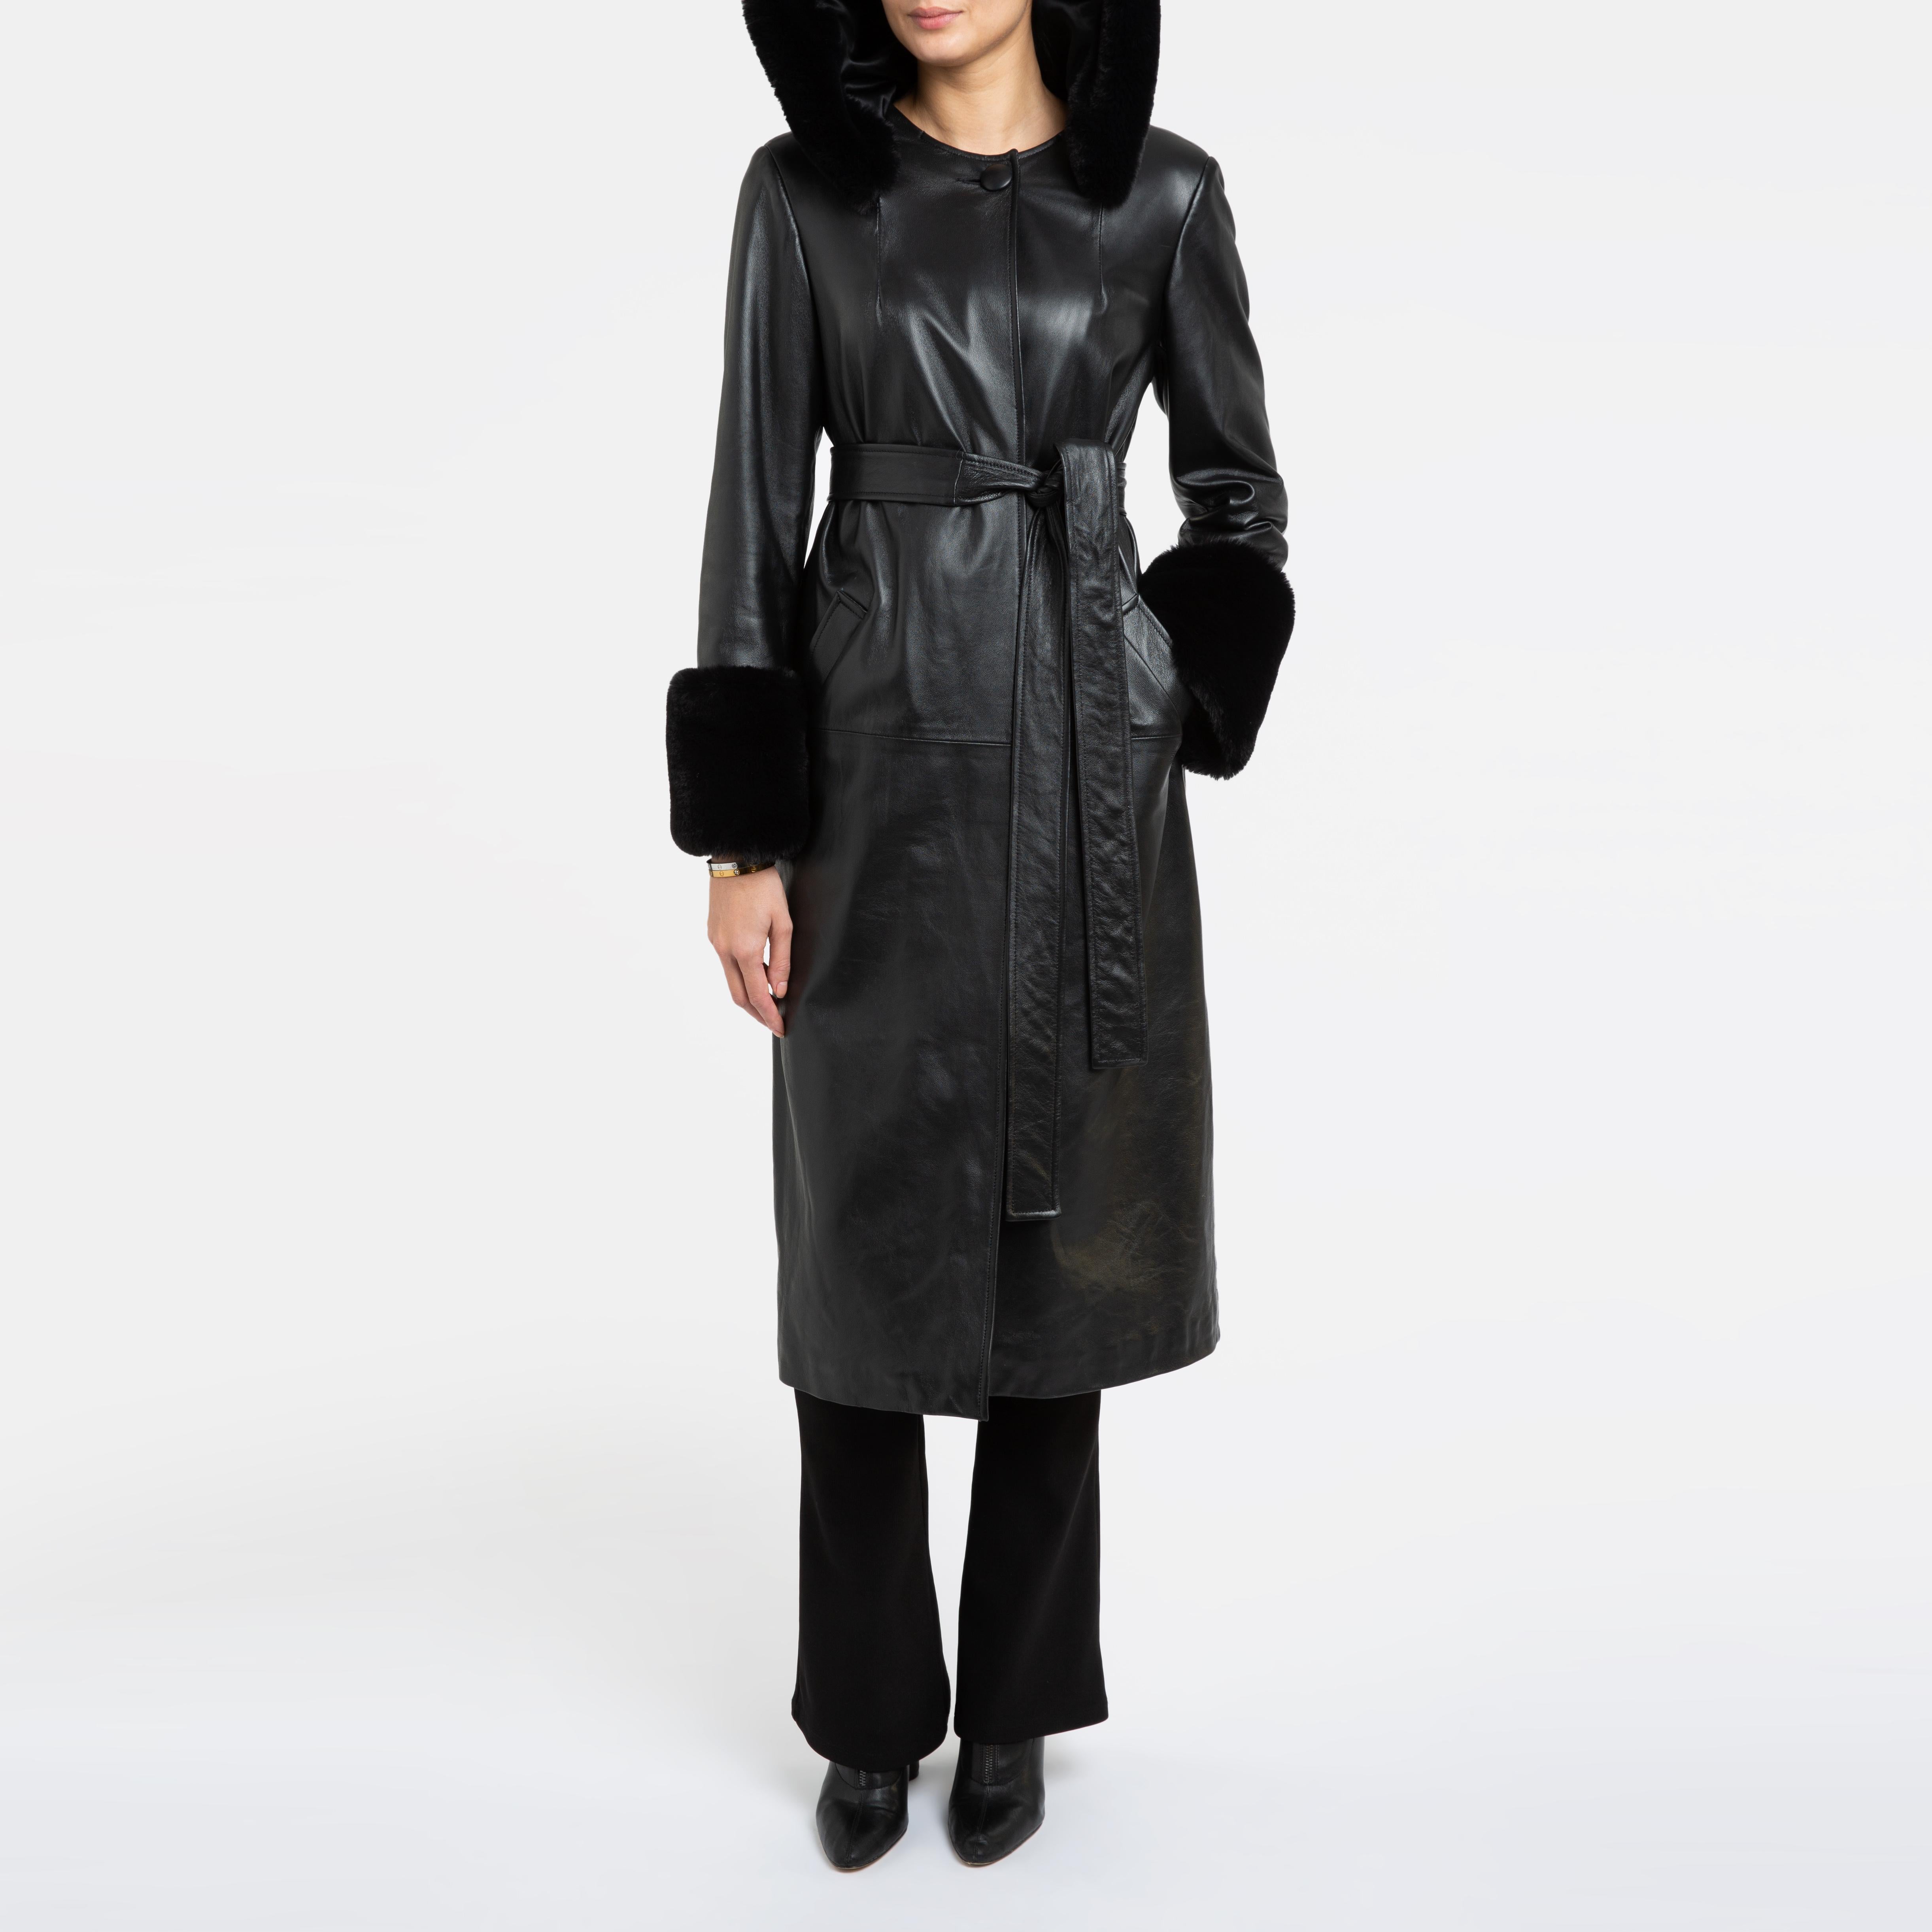 Verheyen London Hooded Leather Trench Coat in Black with Faux Fur - Size uk 10  For Sale 9